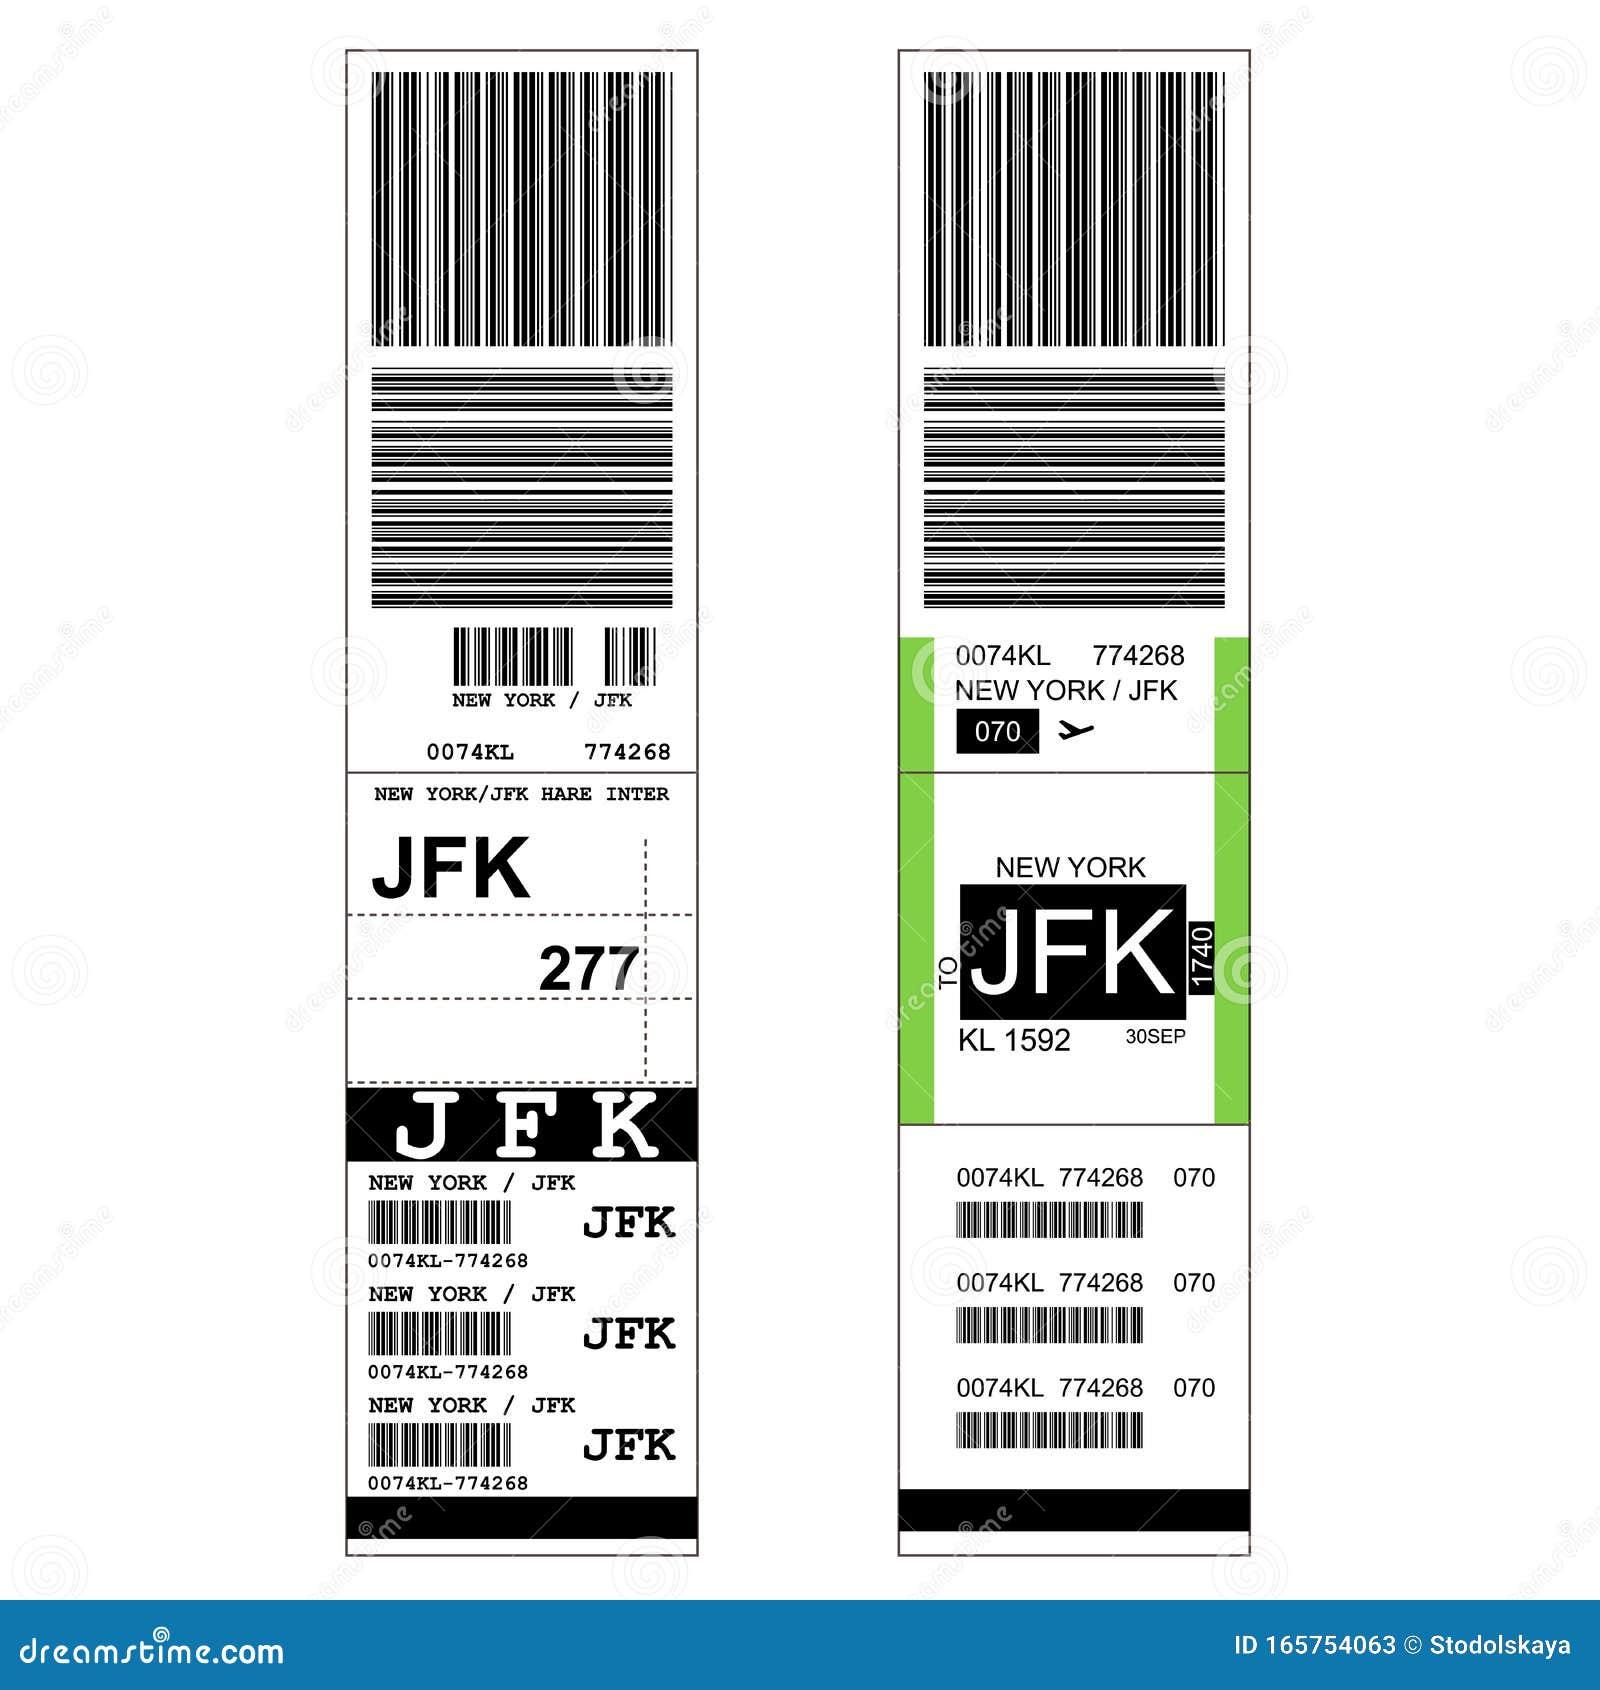 luggage with airport sticker label - suitcase with tag and jfk new york airport sign